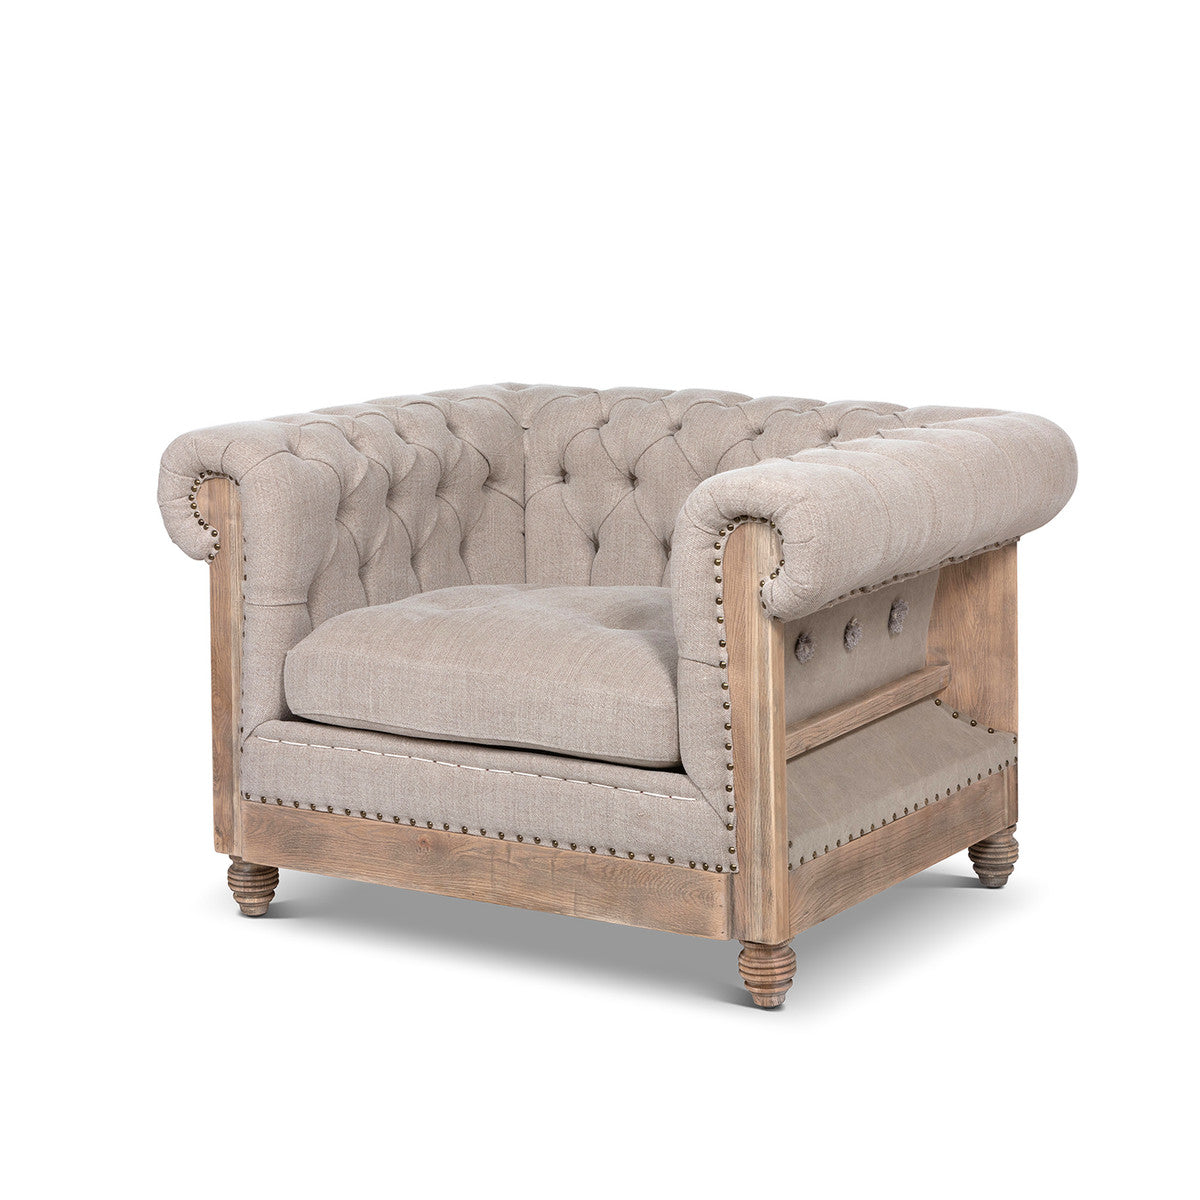 Hillcrest Tufted Chair Light Washed Linen